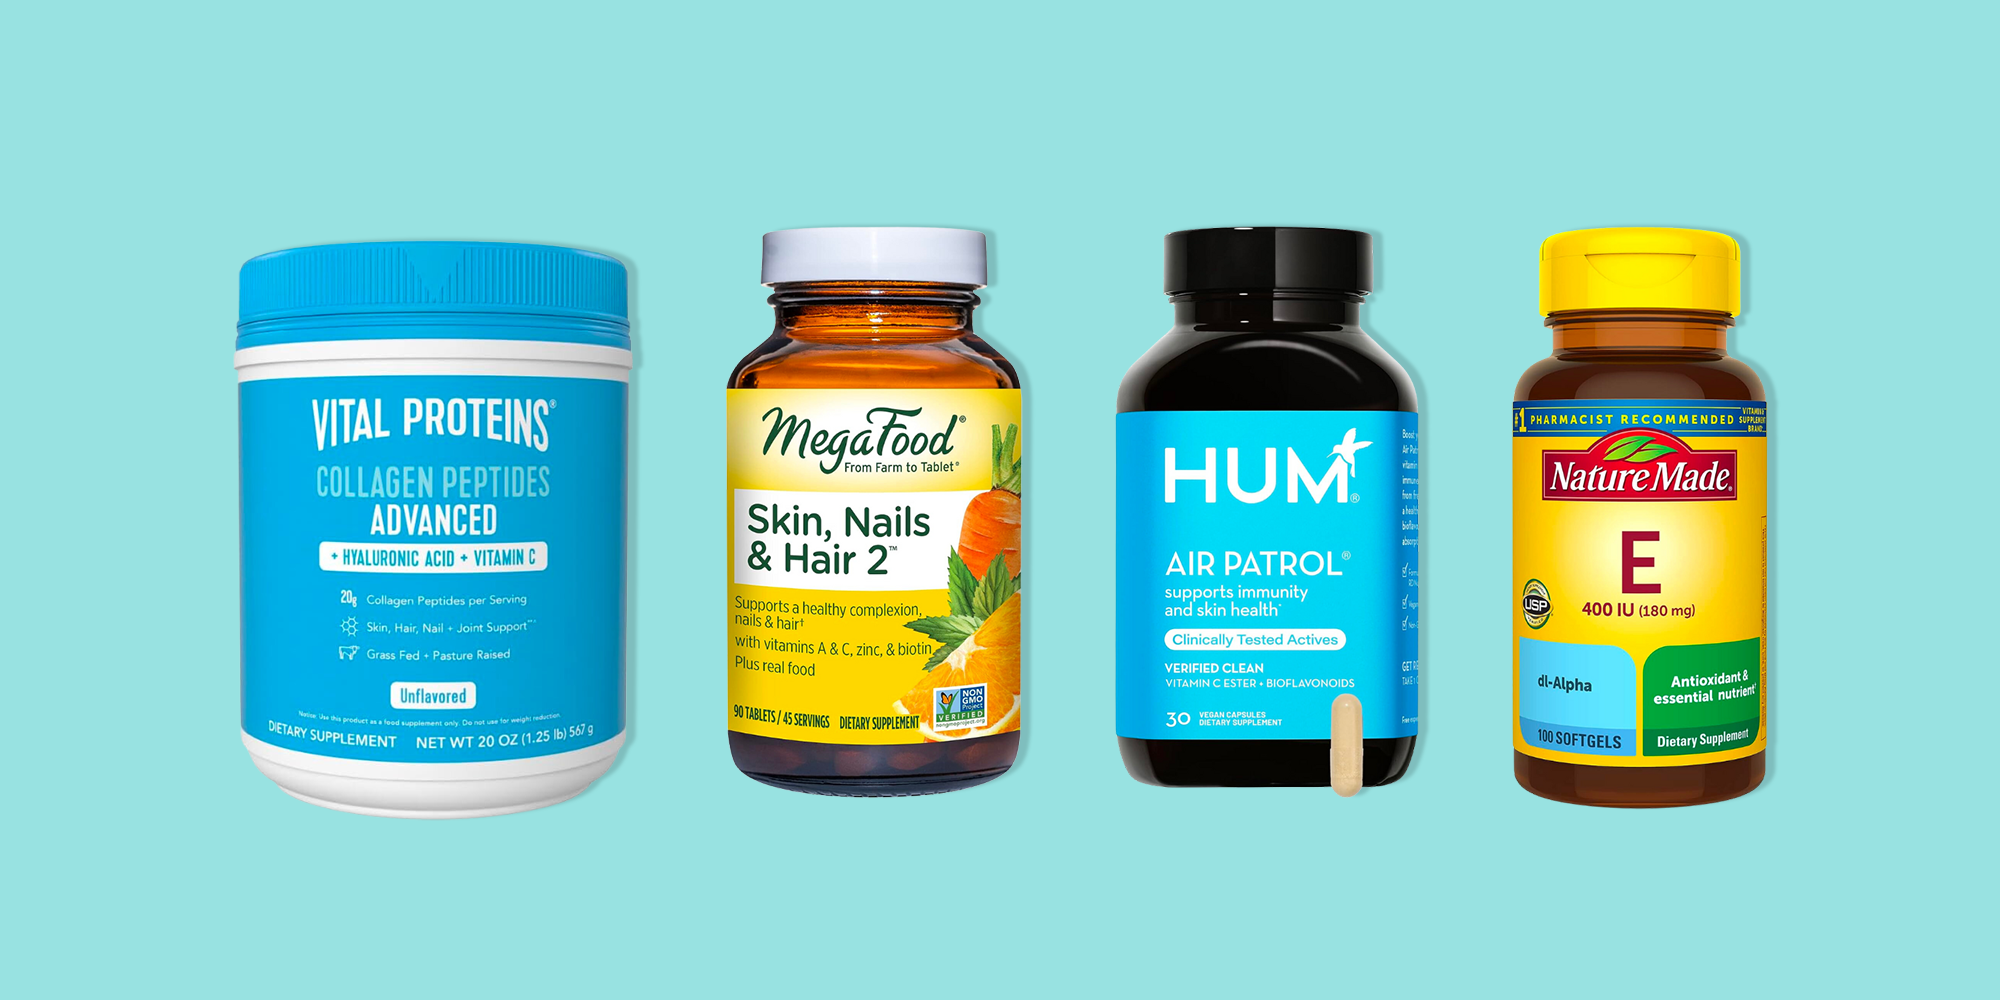 9 Best Vitamins and Supplements for Skin, According to Experts